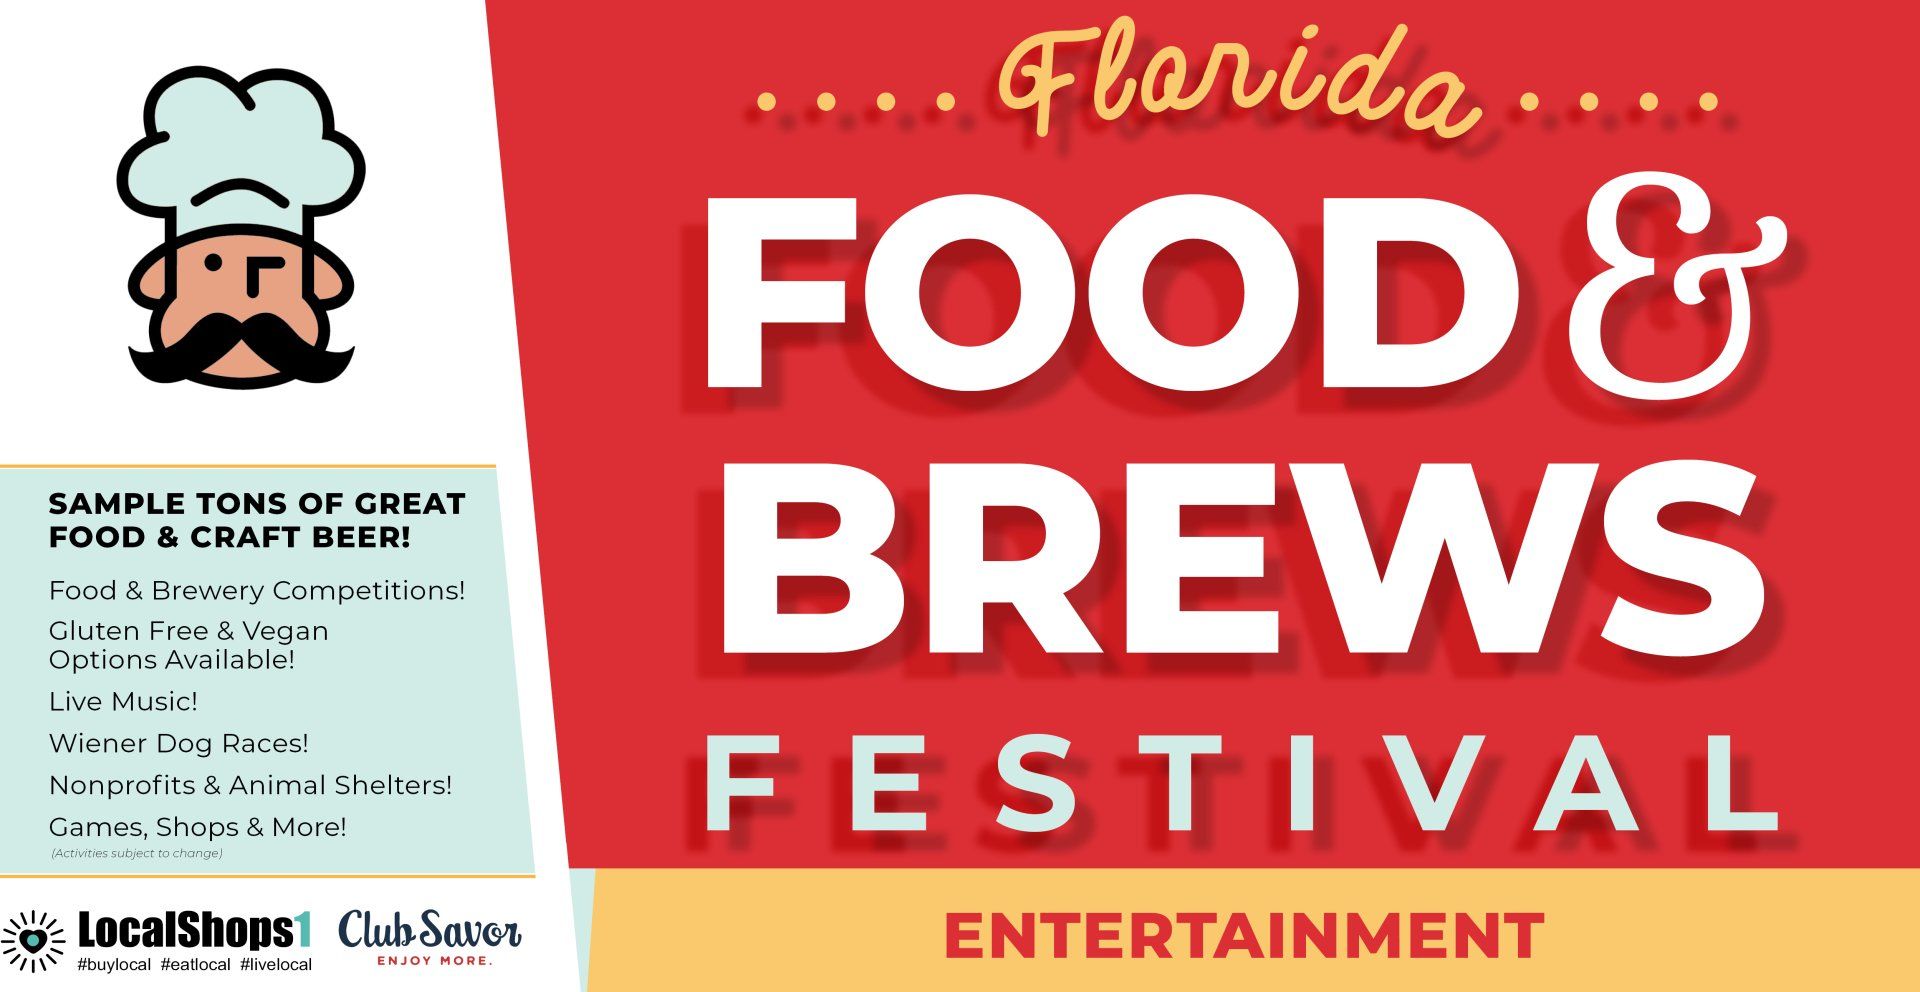 Music & Entertainment at Florida Food and Brews Festival 2020